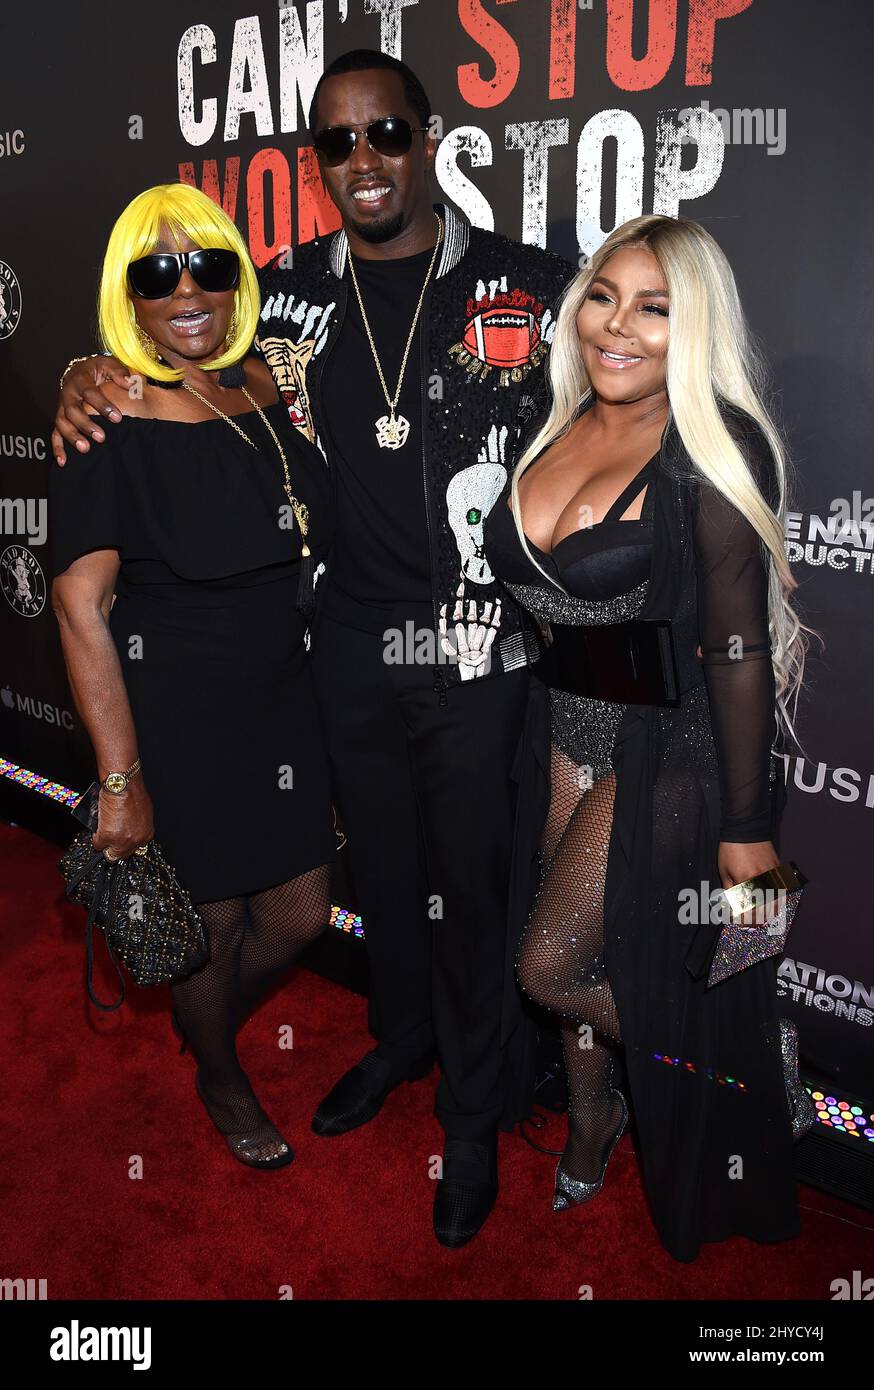 Janice Combs, Sean Combs and Lil' Kim attending the 'Can't Stop, Won't Stop: A Bad Boy Story' premiere held at the Writers Guild of America in Los Angeles, USA Stock Photo